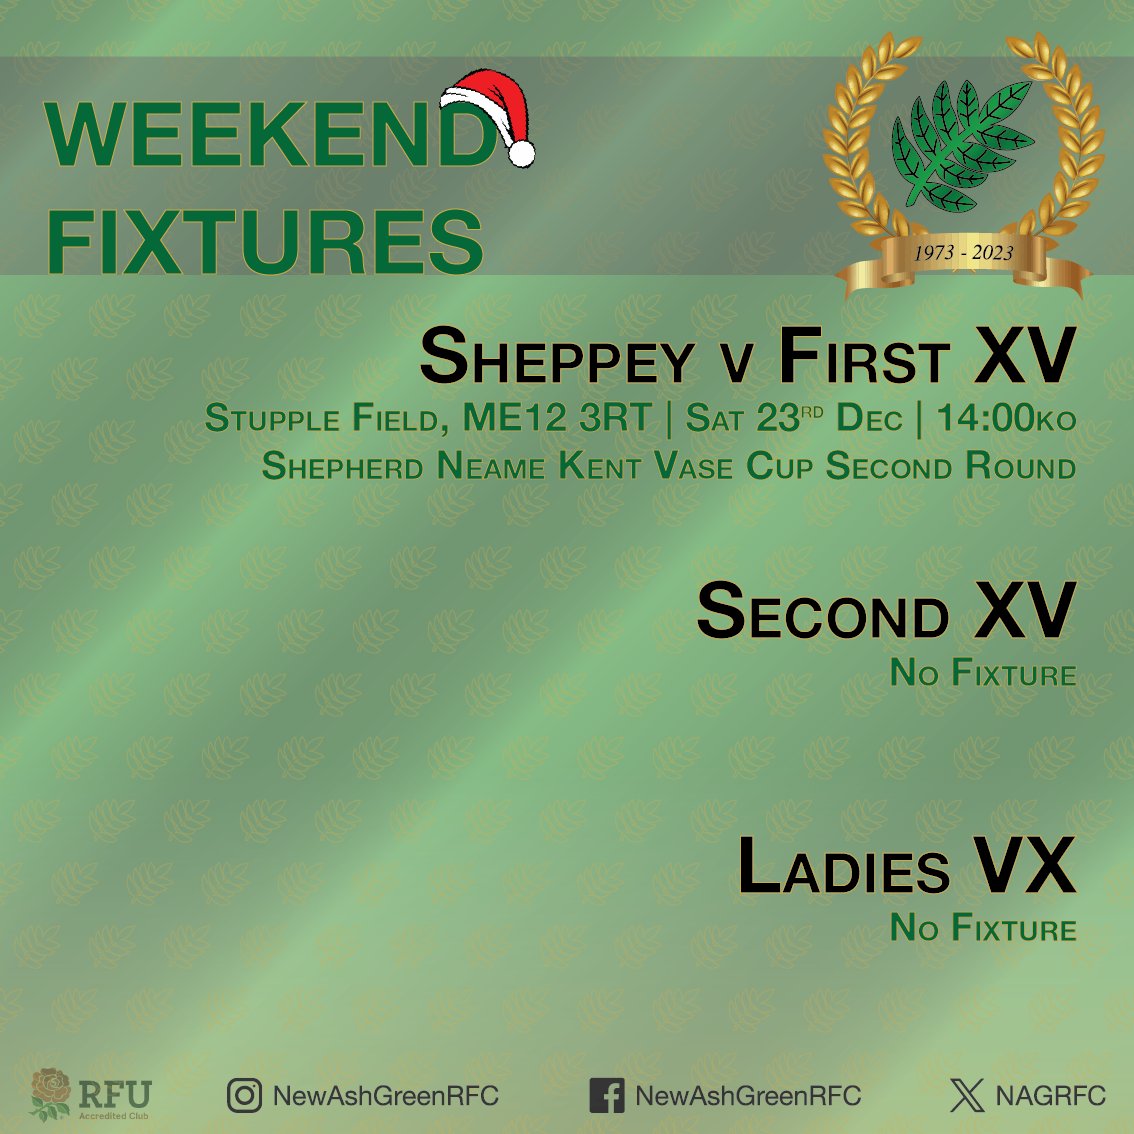 Just one more game for the 1XV in 2023 and it's away to @SheppeyRFC_1892 in the Kent Vase Cup Second Round! A repeat of last season's semi final and looking to end the year on a high! 
All support appreciated!